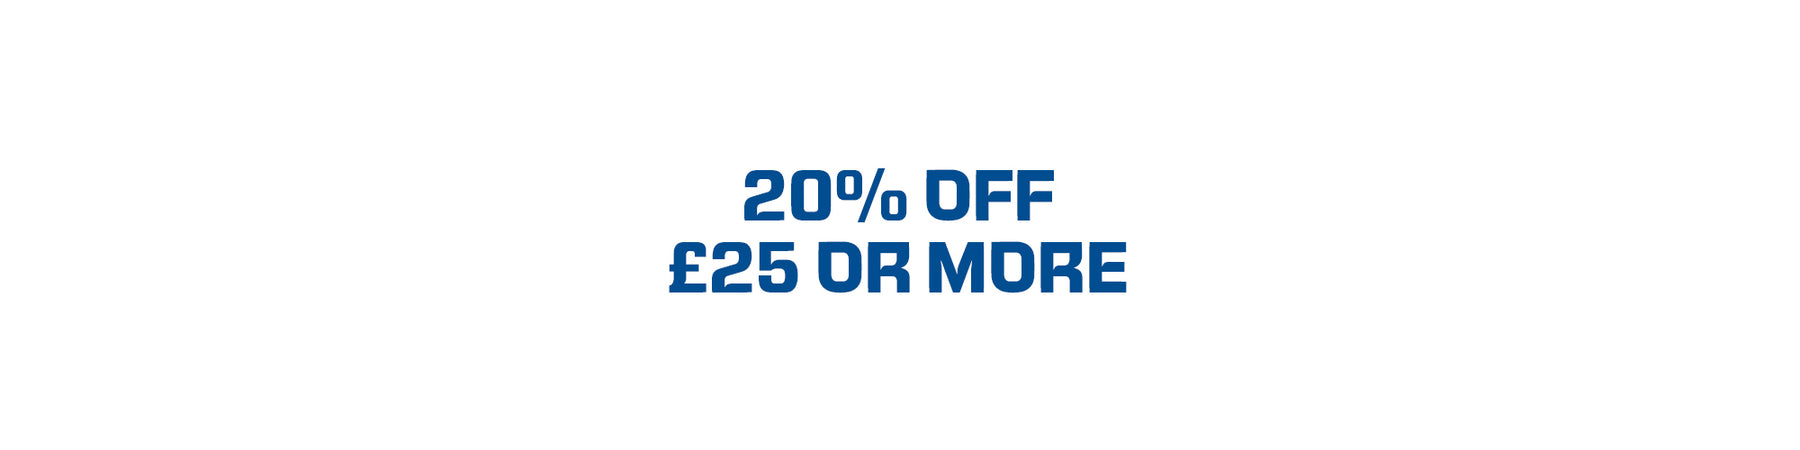 20% OFF Order When You Spend £25 or More in the Store